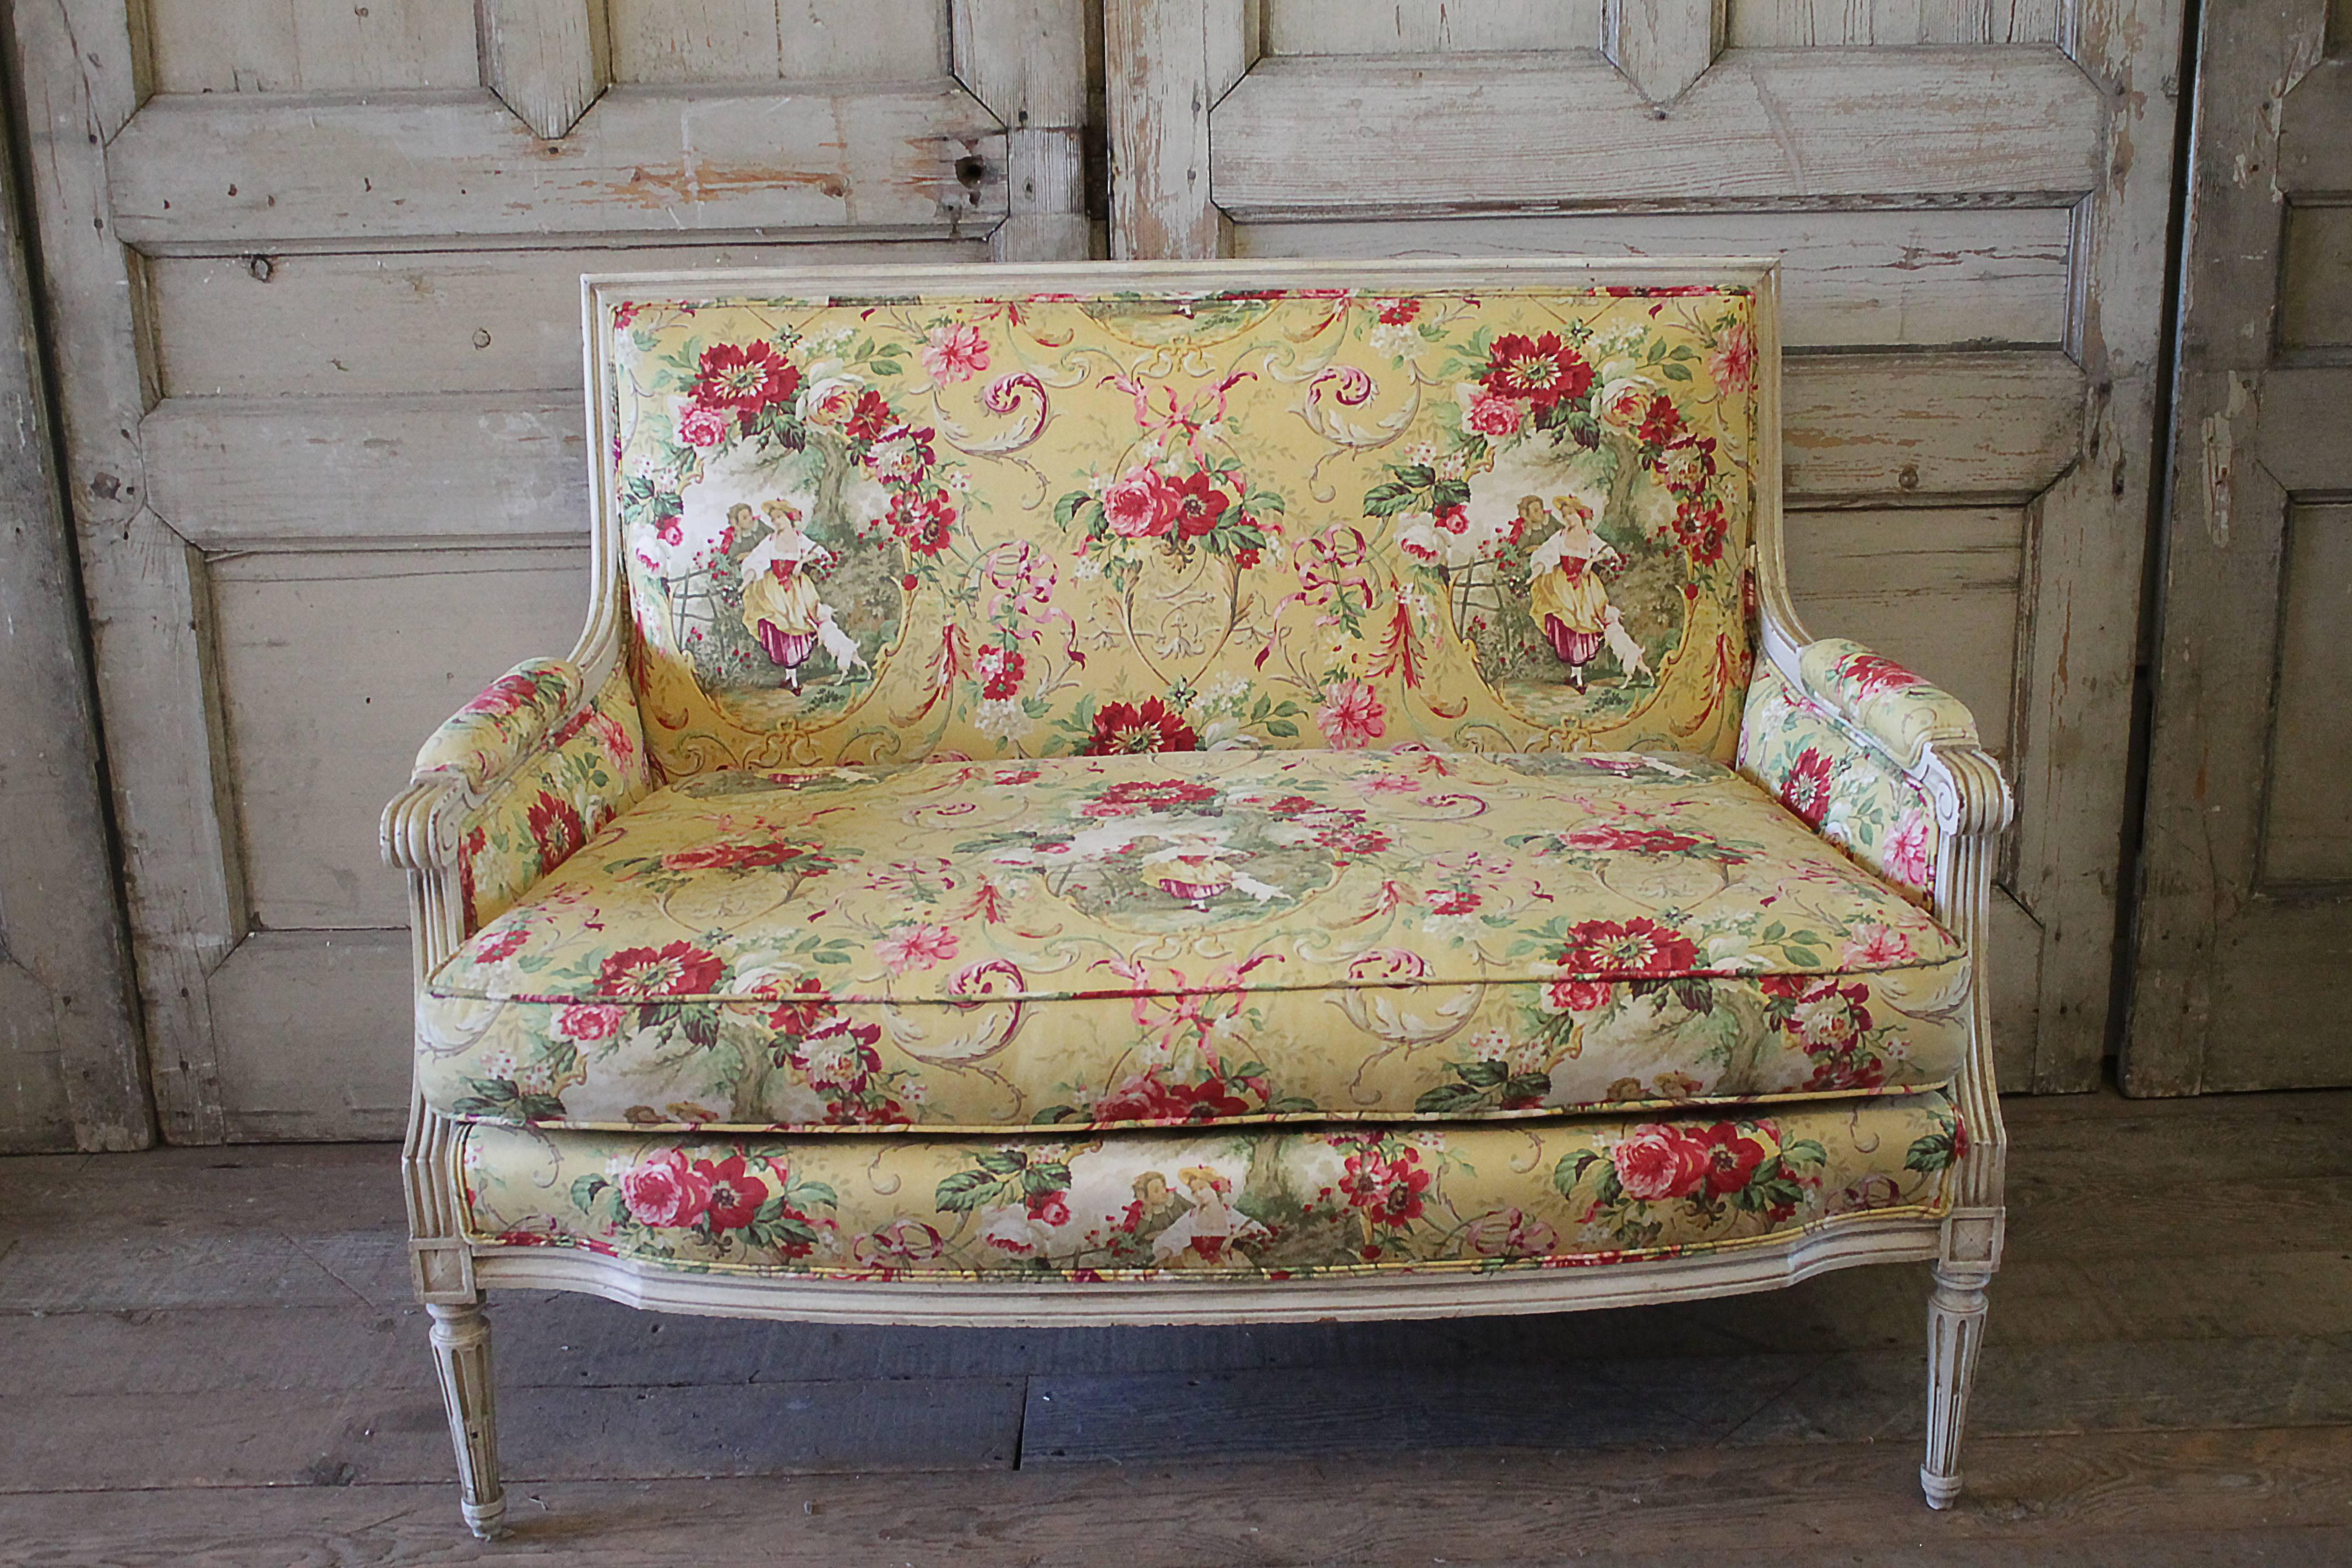 Beautiful Louis XVI style loveseat, with a creamy white painted frame. Subtle distressed edges, with an antique patina. Upholstered in a butter yellow toile de jouy cotton, with scrolls of dark pink and light pink floral clusters.
The seat is a